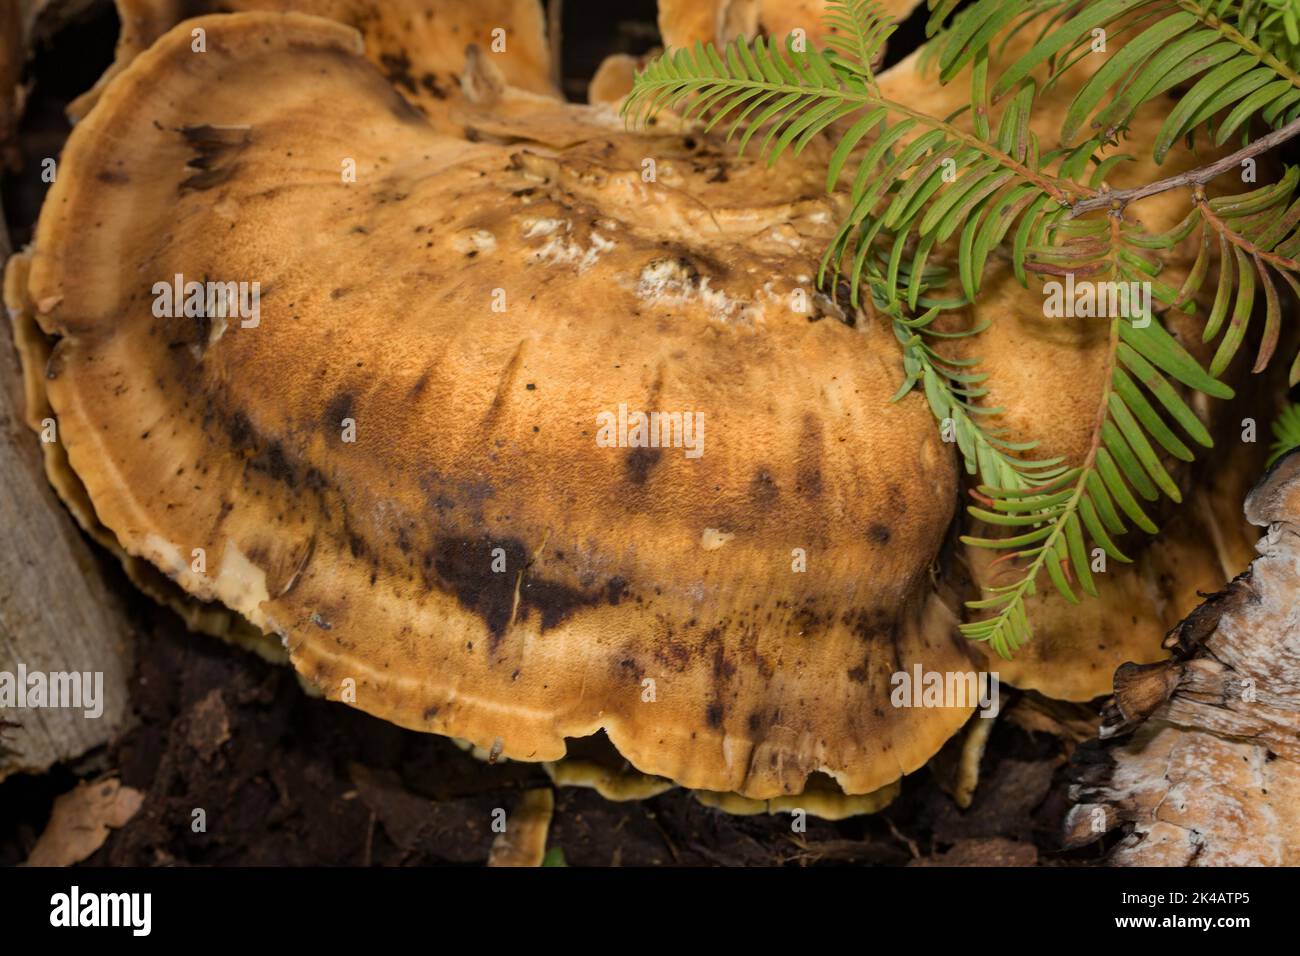 Giant porling fruiting body with brown cap Stock Photo